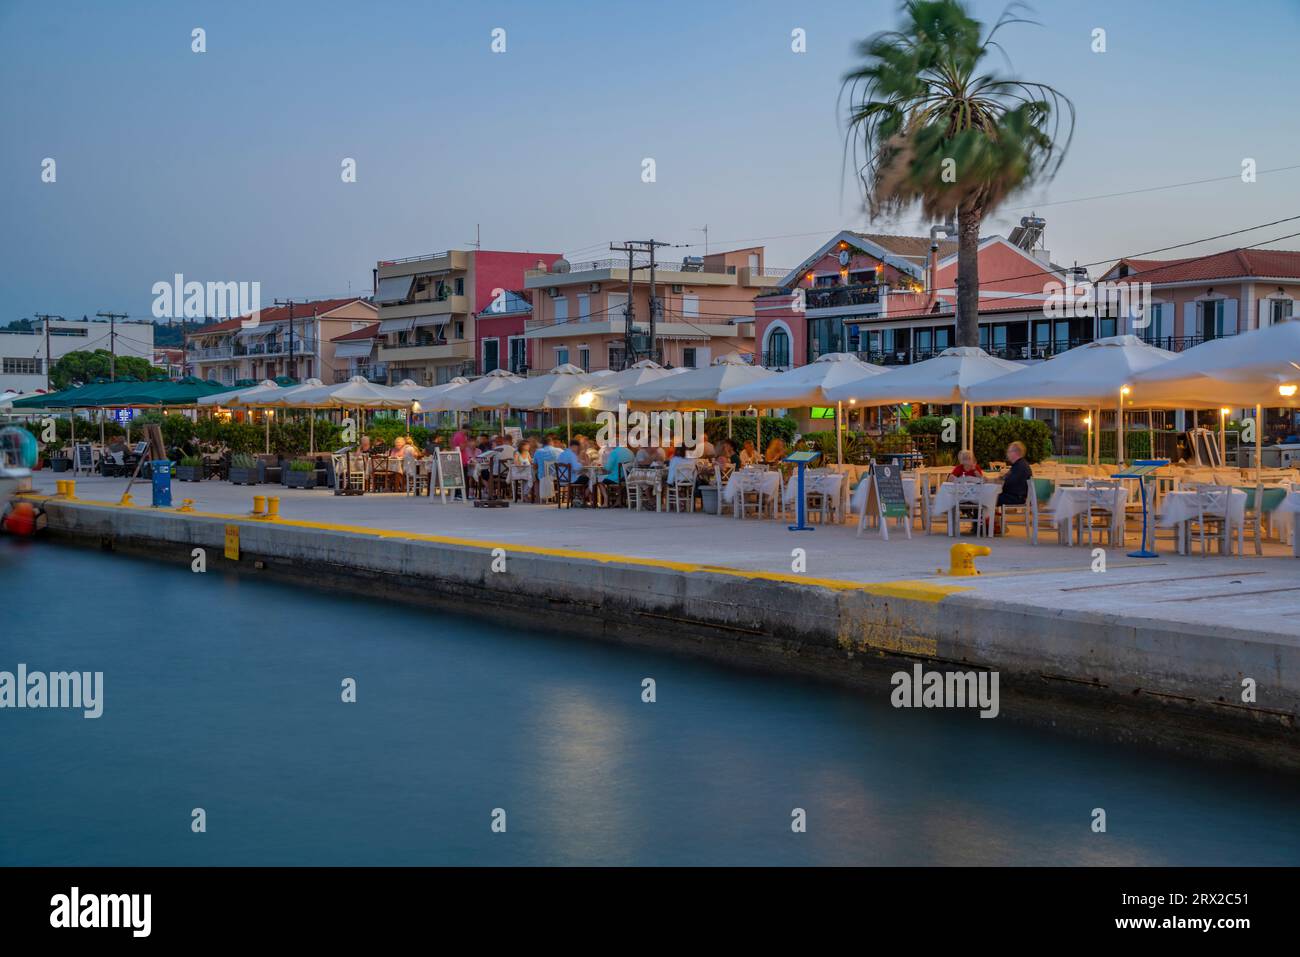 View of cafe and restaurant at the harbour at dusk, Lixouri, Kefalonia, Ionian Islands, Greek Islands, Greece, Europe Stock Photo